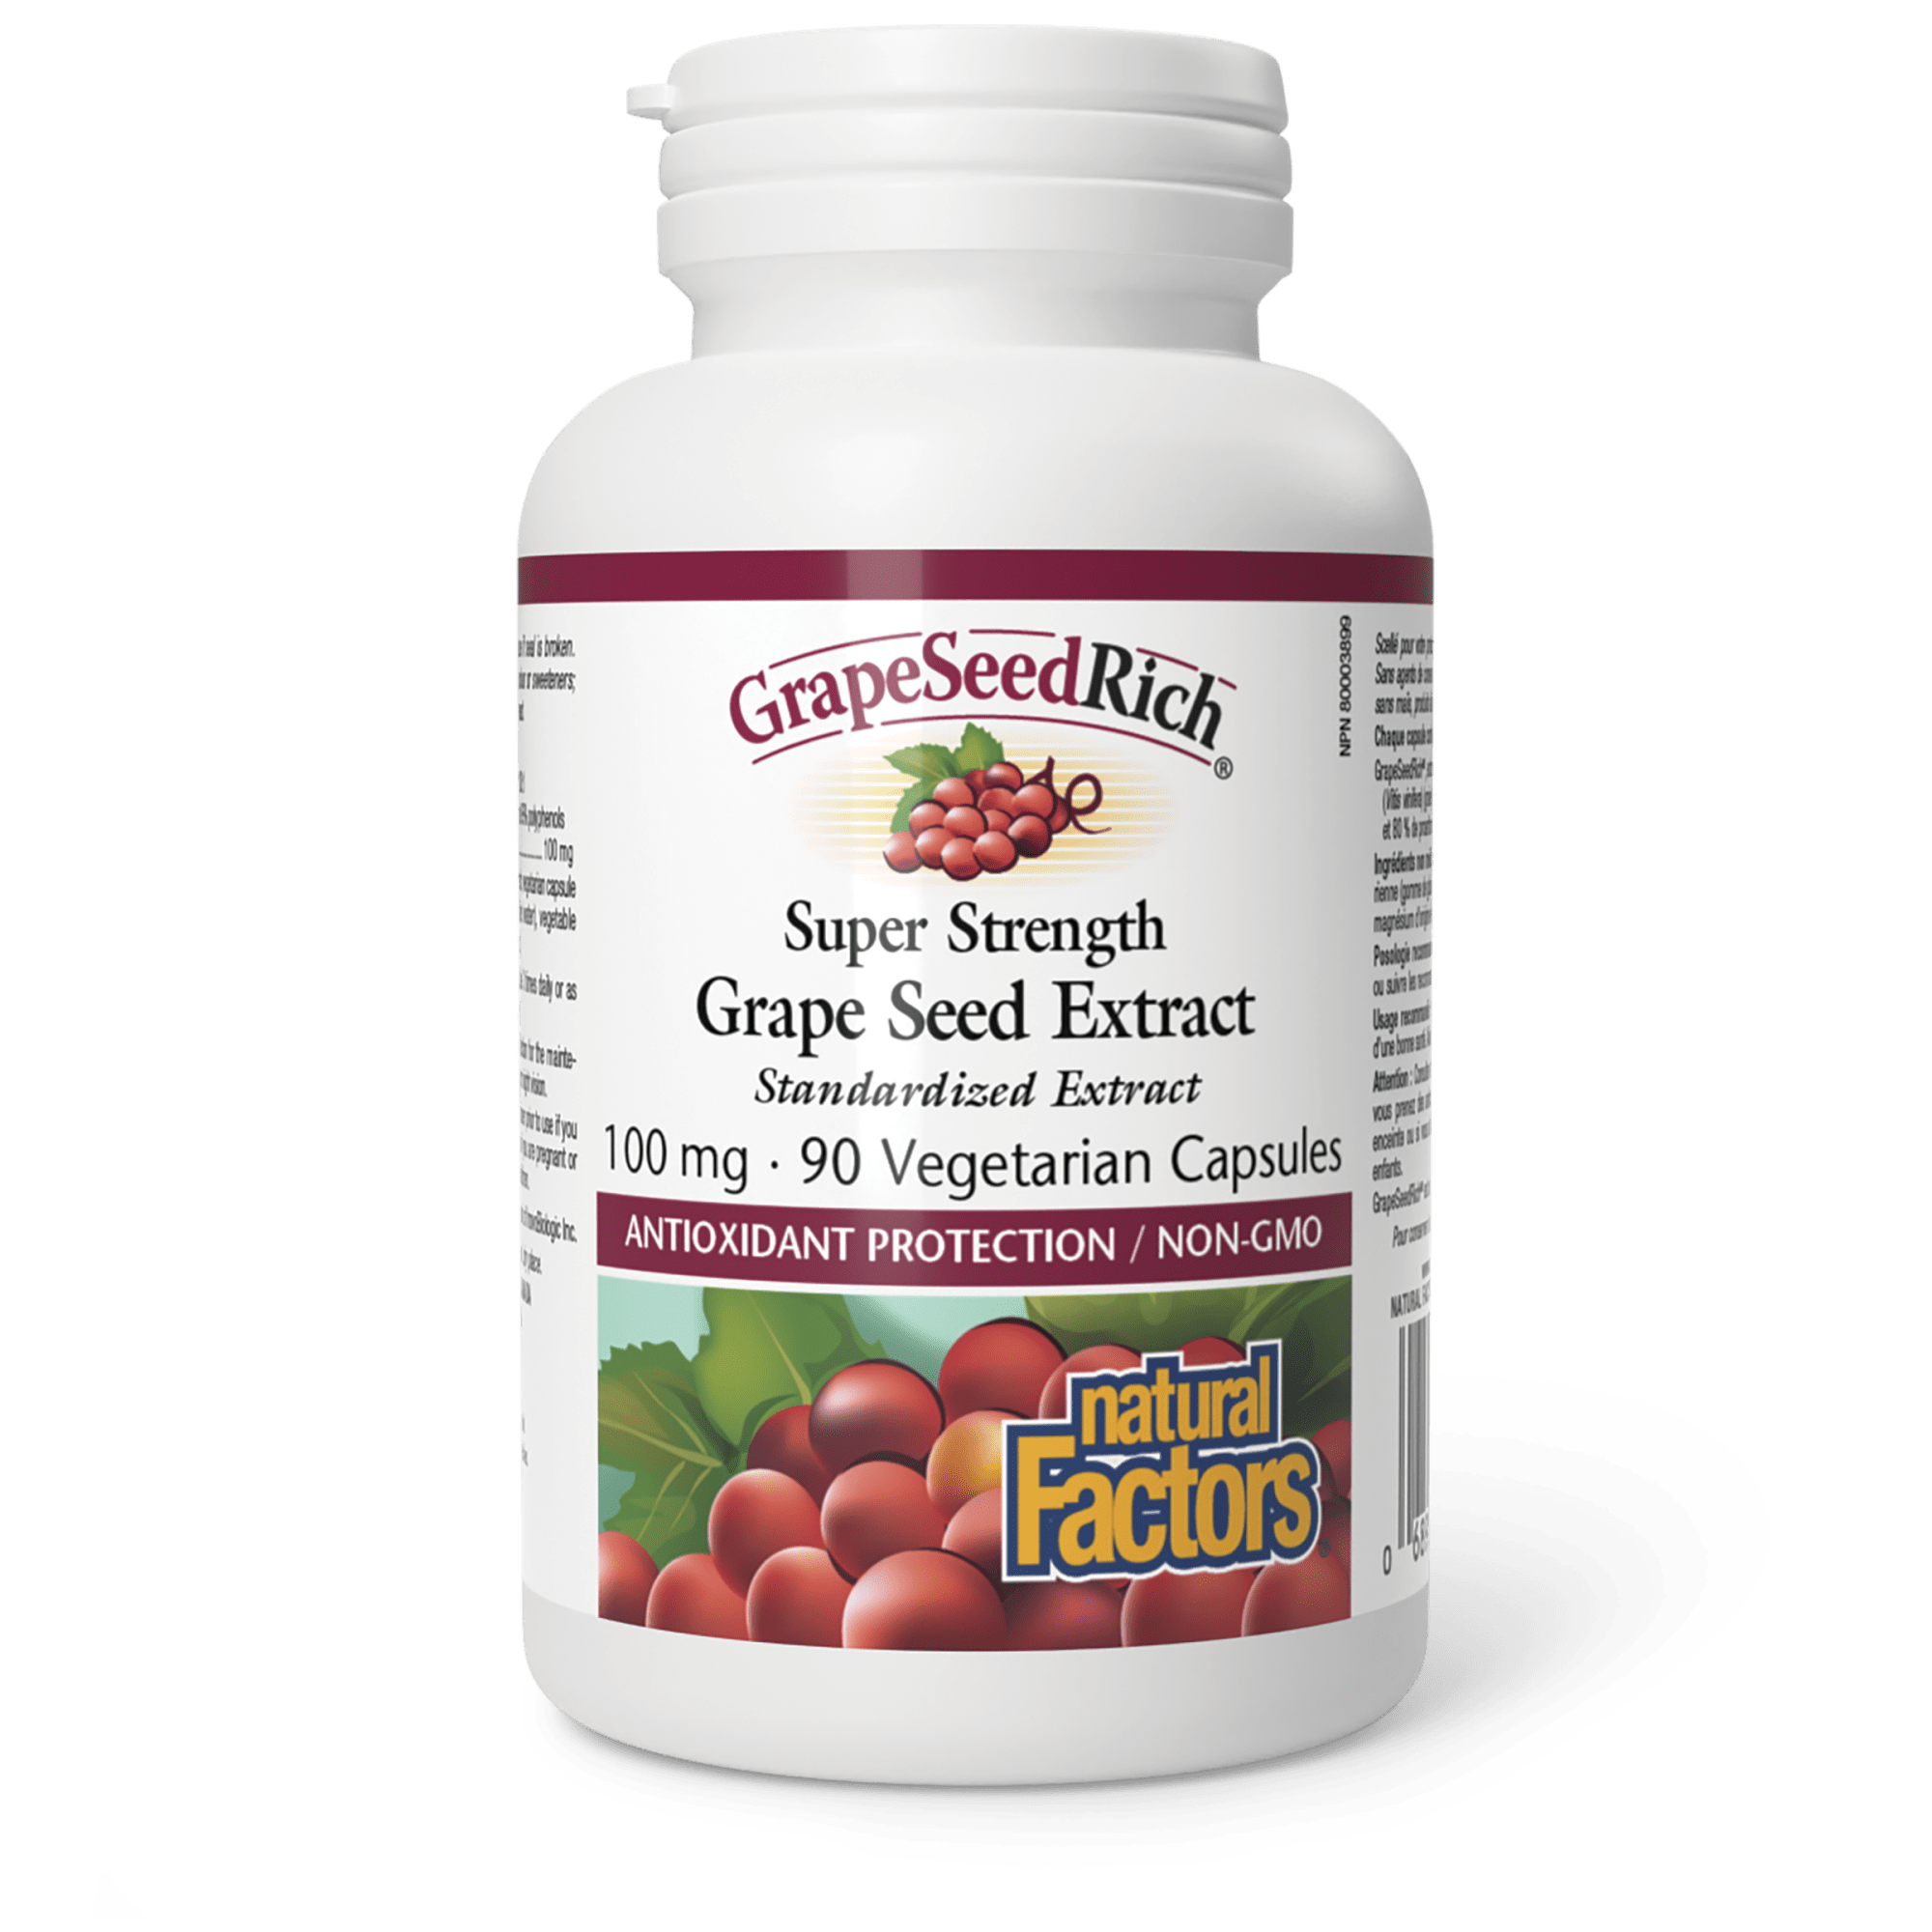 Natural Factors GrapeSeedRich Super Strength Grape Seed Extract 100mg 90 Vegetarian Capsules